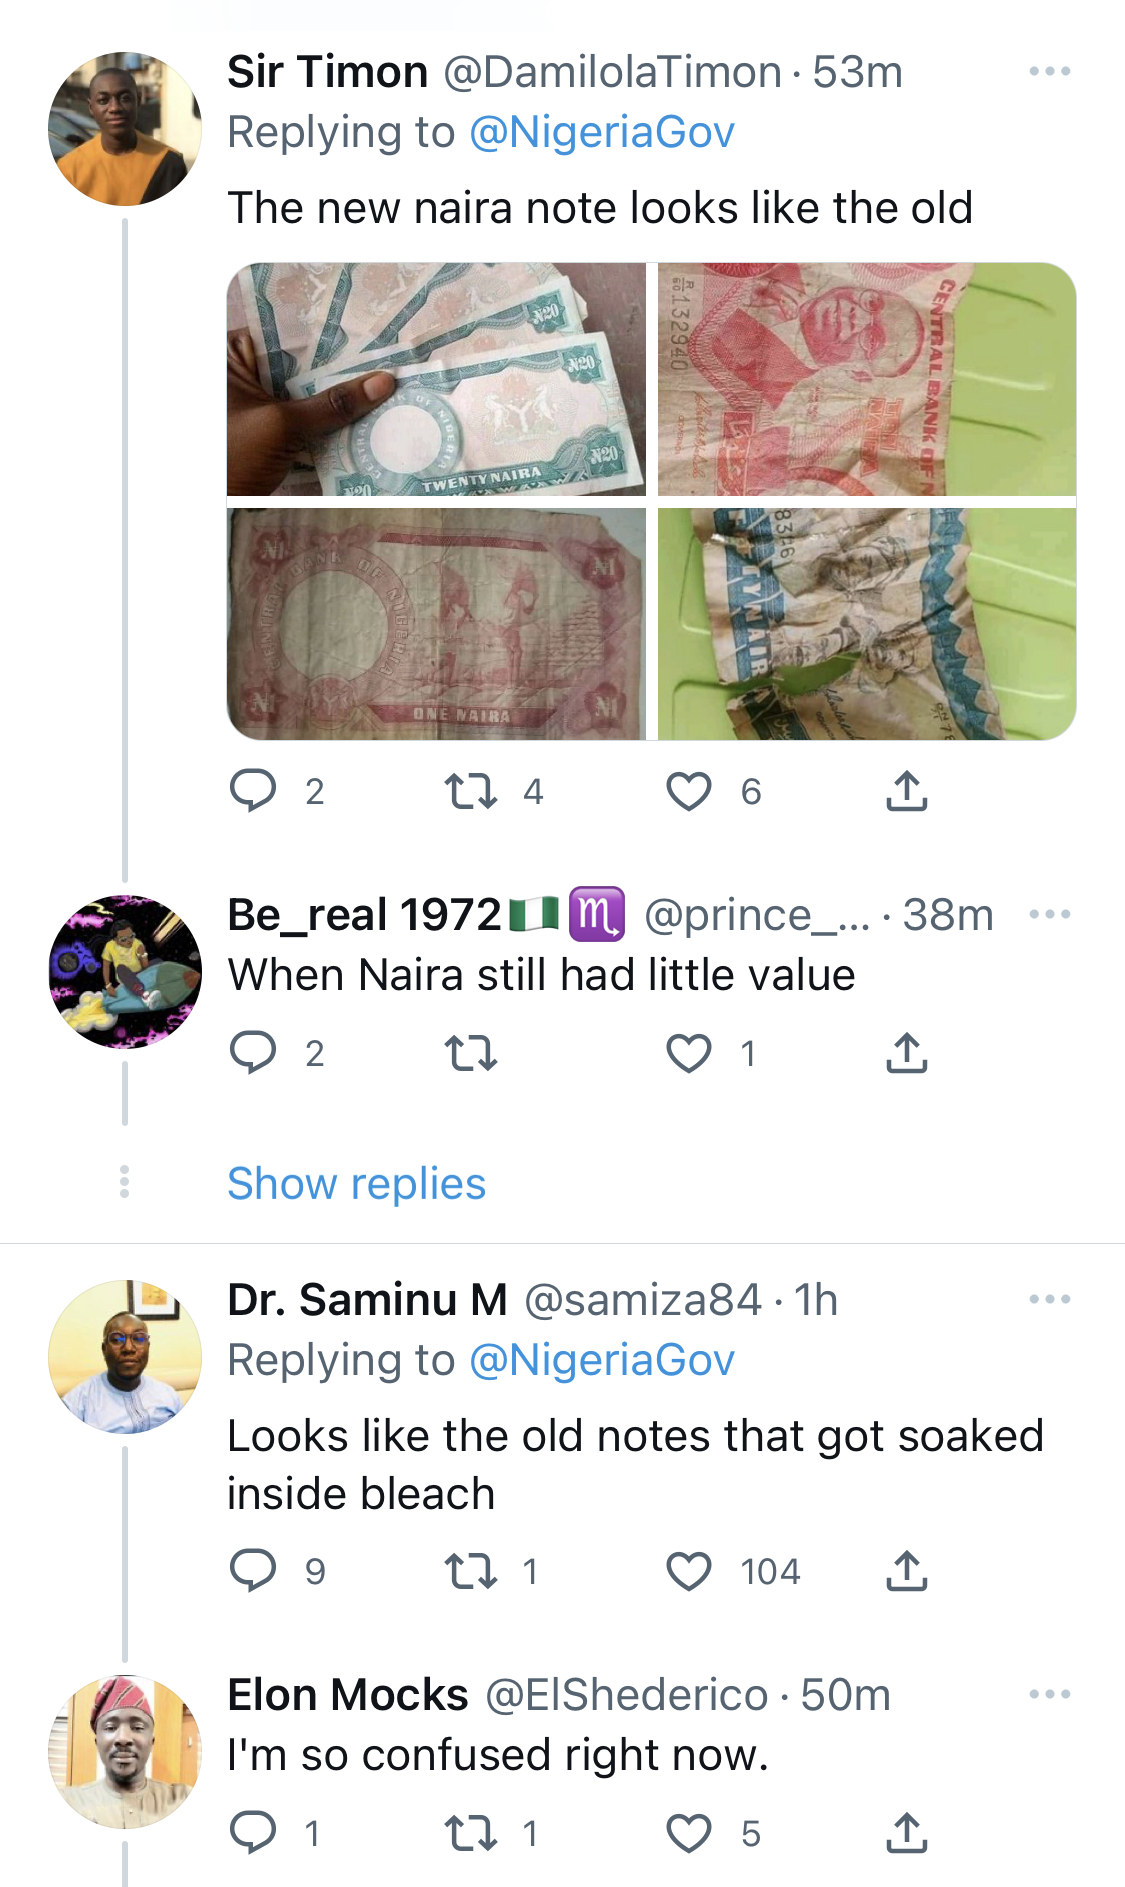 We might as well dye our old notes at home - New Naira Notes Design sparks Outrage